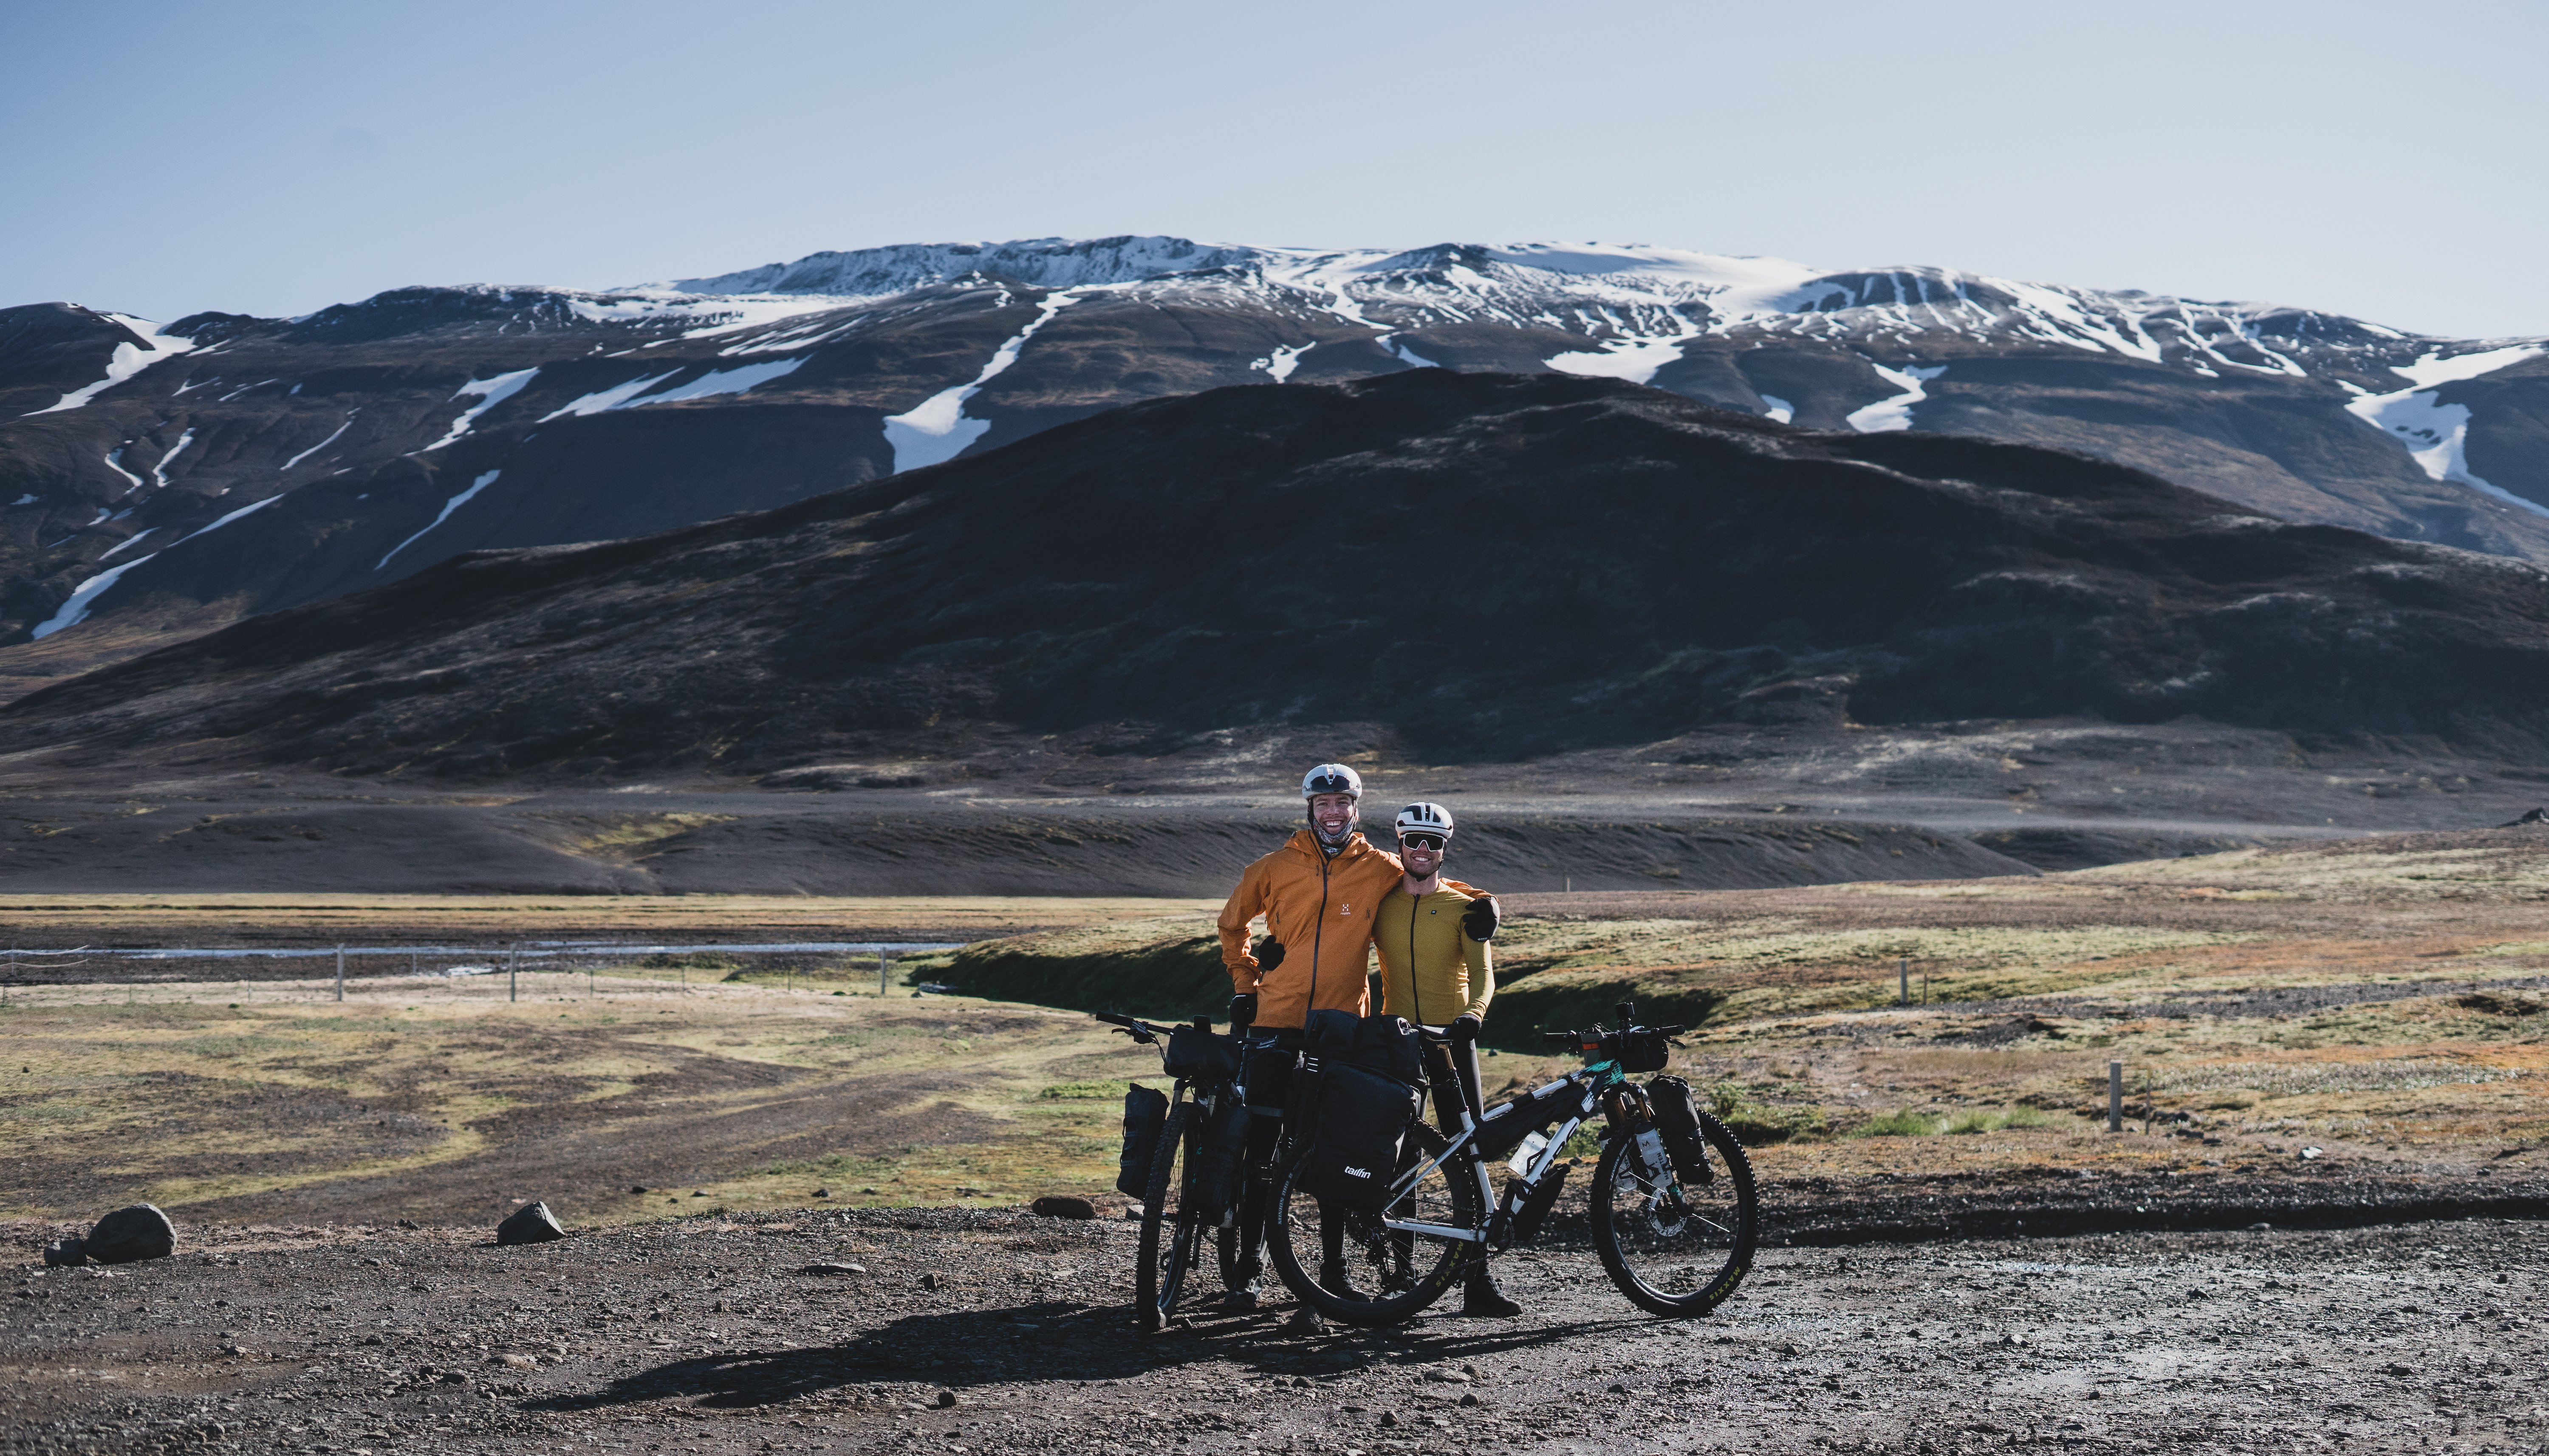 Read Chasing the Northern Lights by TheBikepack